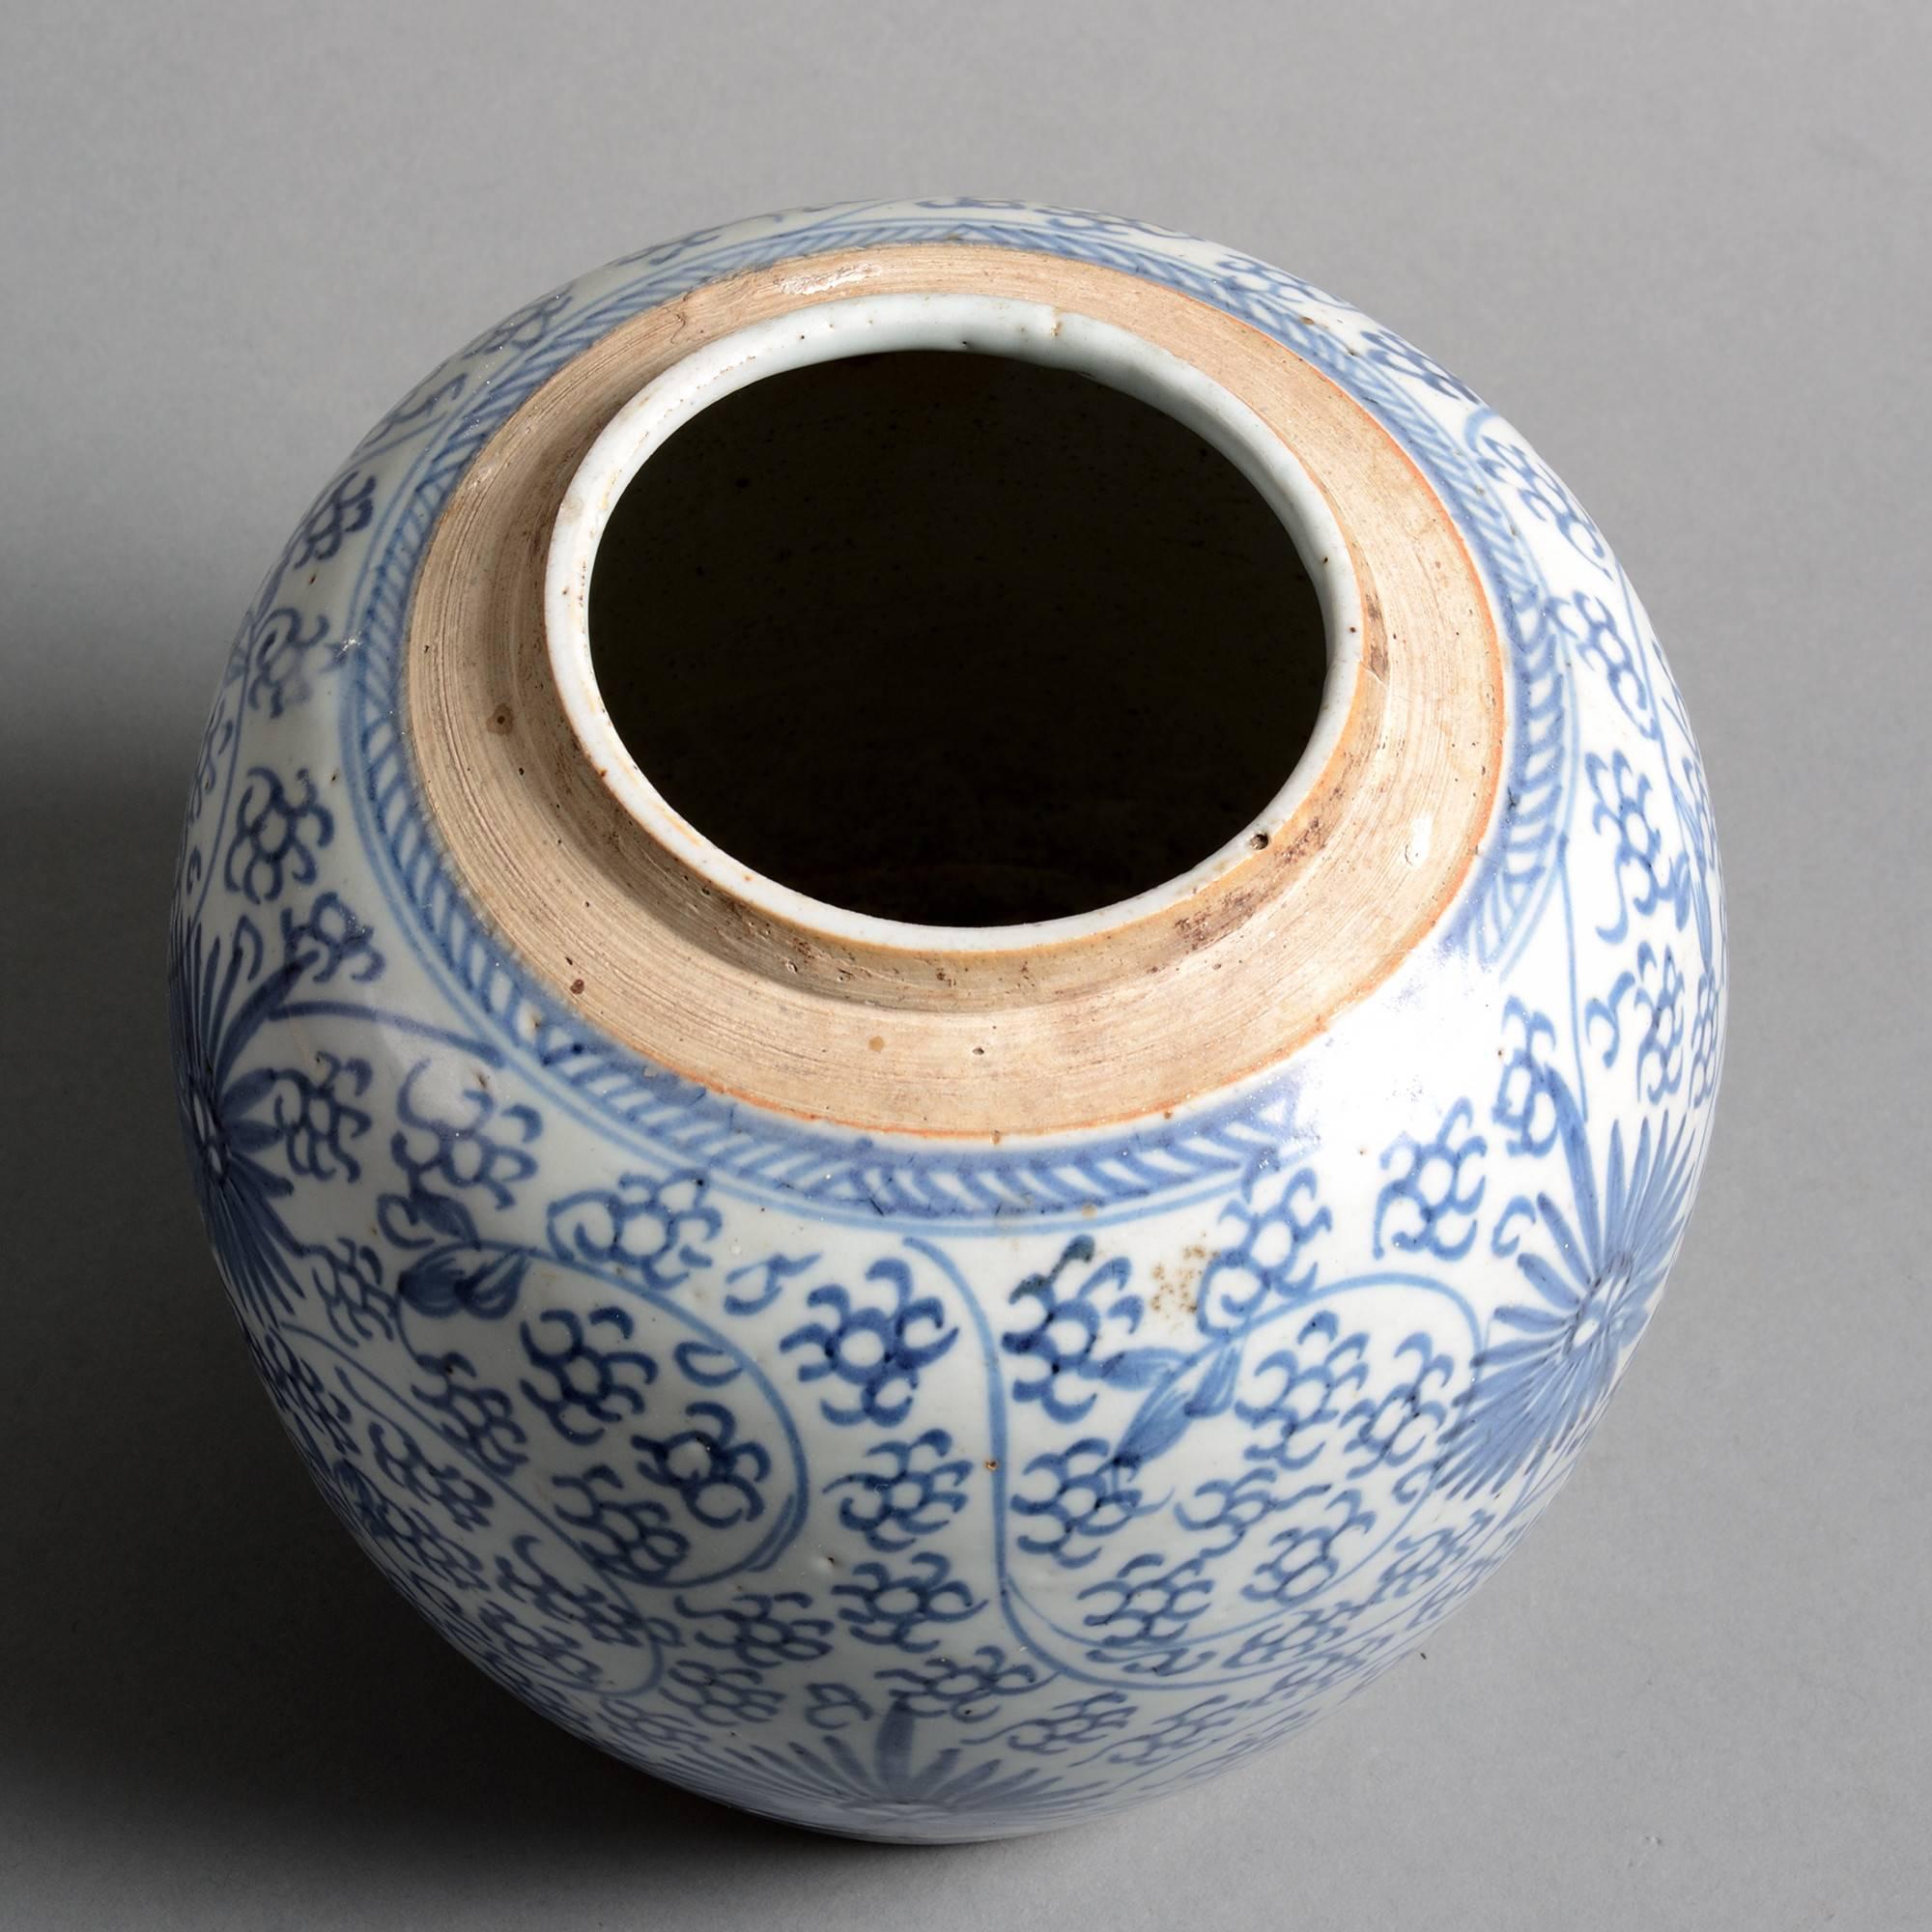 A late 18th century blue and white glazed porcelain jar of bulbous form, decorated throughout with stylized flowers and foliage. 

Qing dynasty, Jiaqing period.

Good condition with old star crack to underside of base.